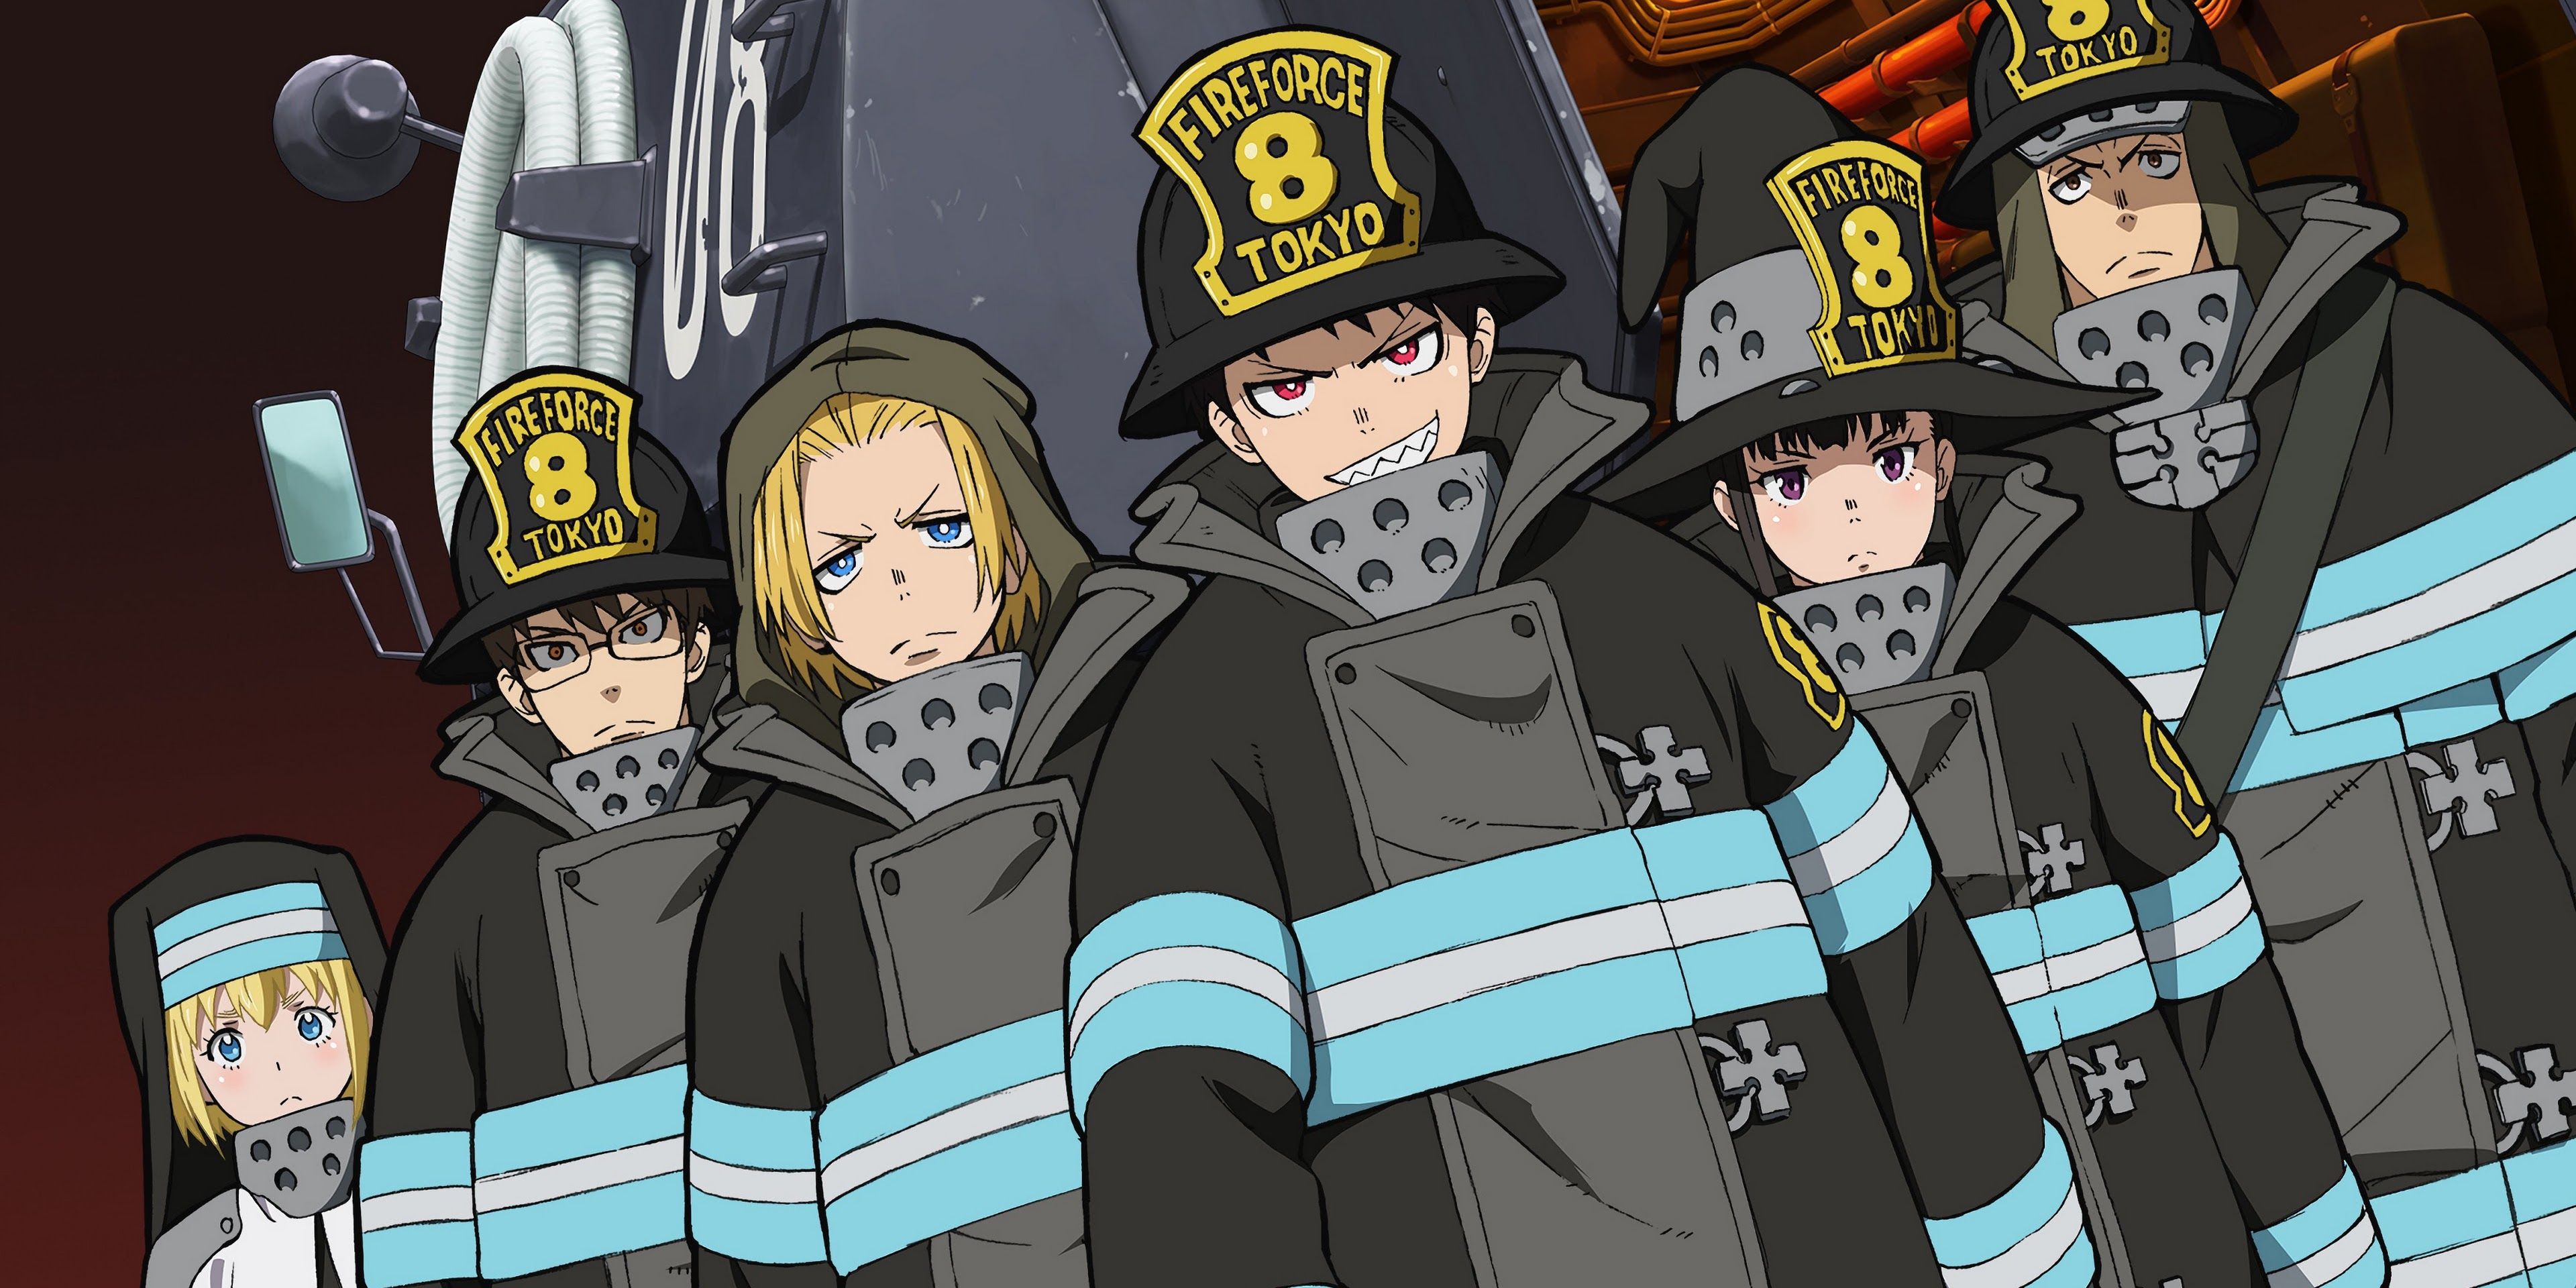 The Special Fire Force Unit 8 in a row